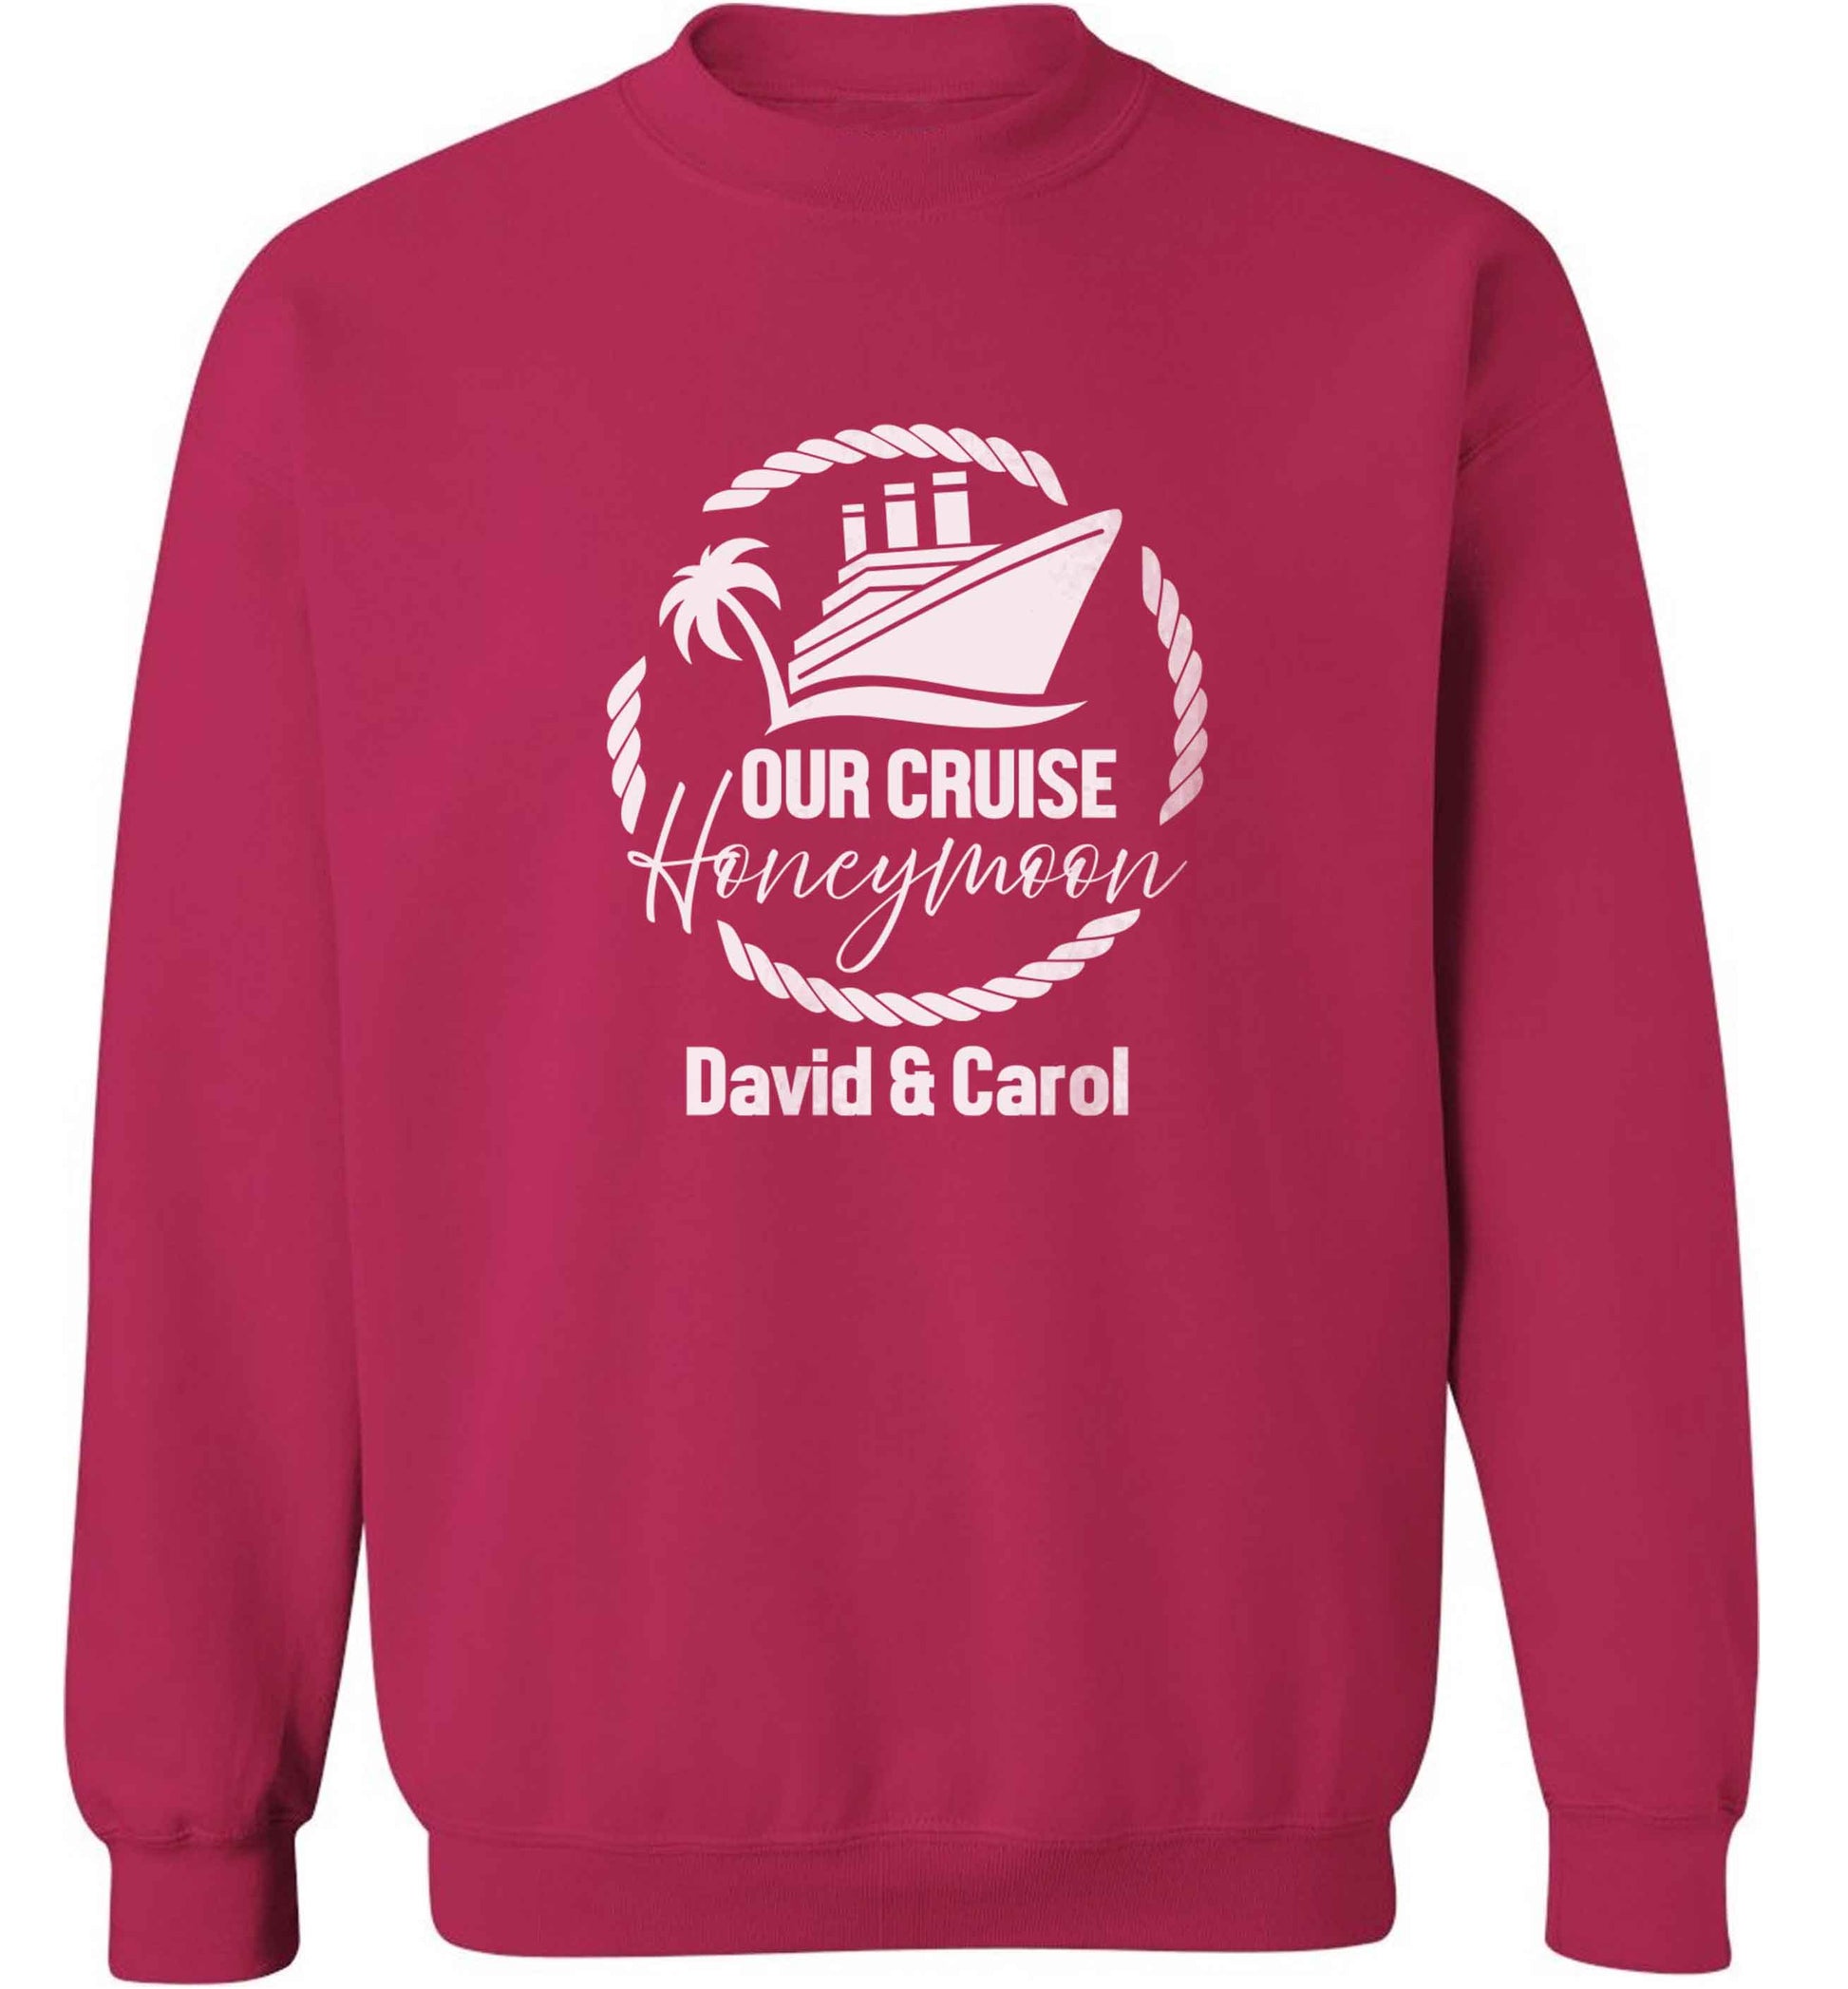 Our cruise honeymoon personalised adult's unisex pink sweater 2XL